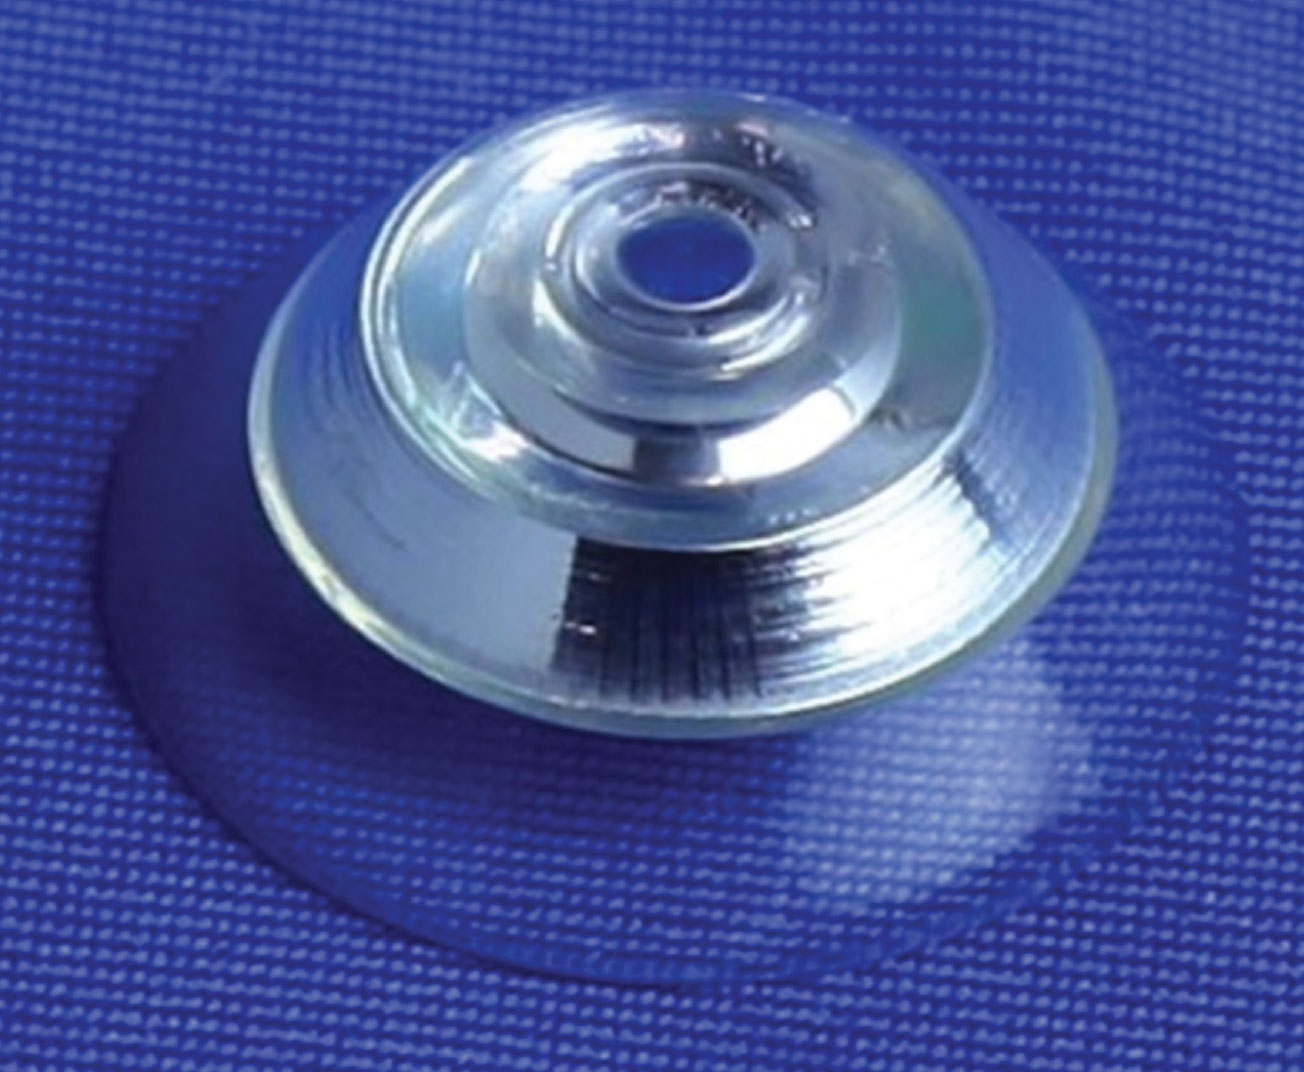 An image of a scleral lens telescope.